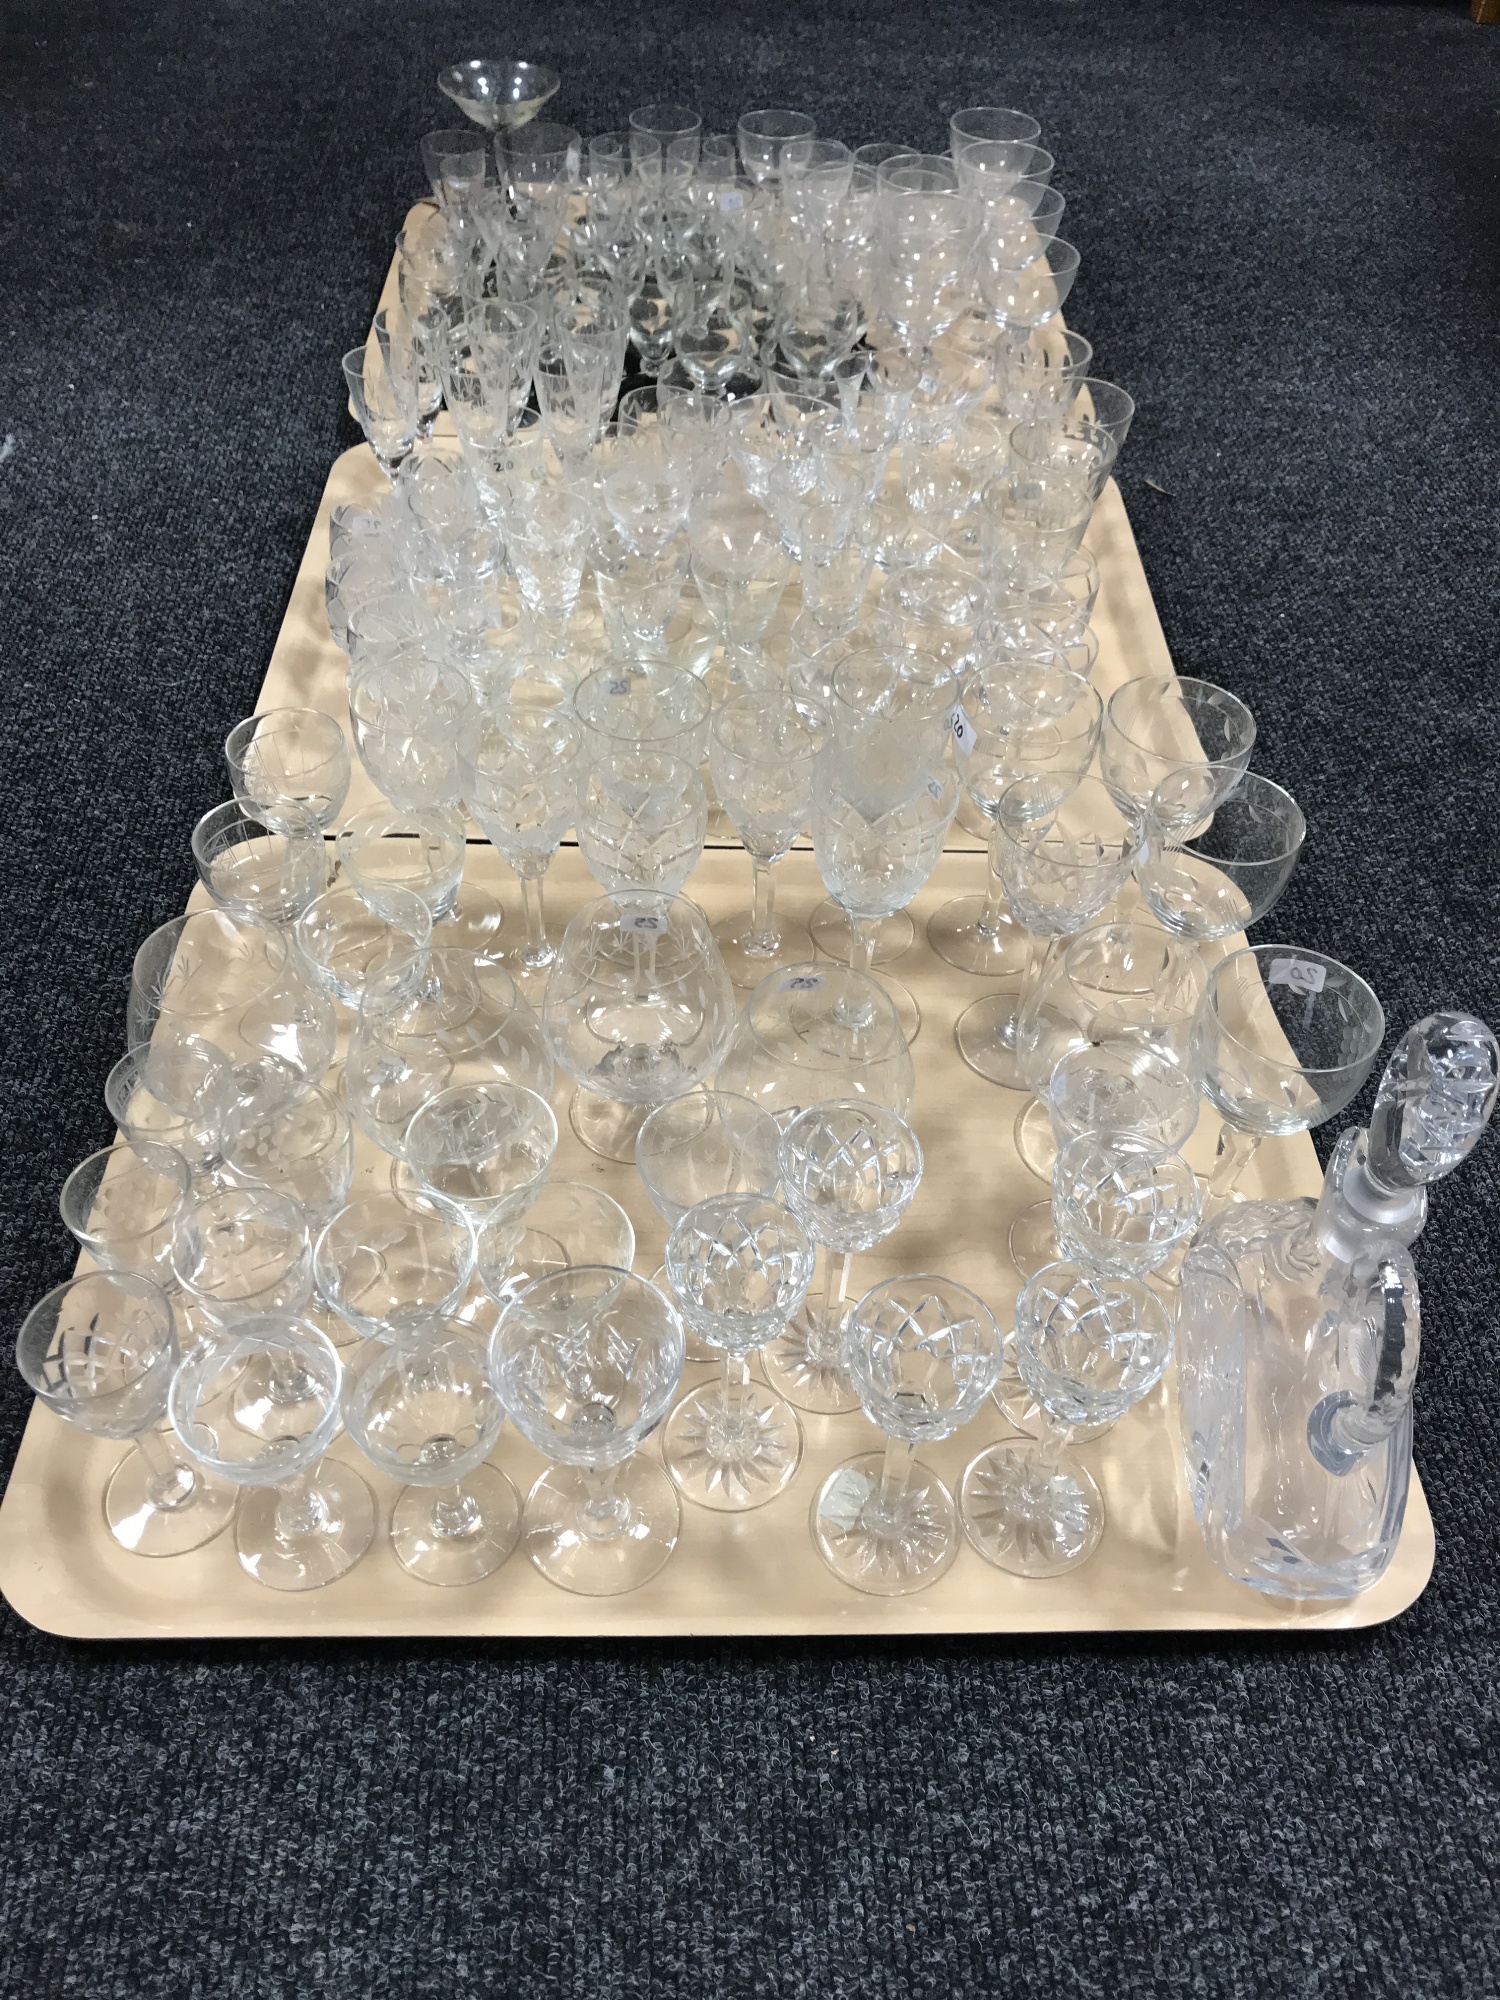 Three trays of continental glass ware.